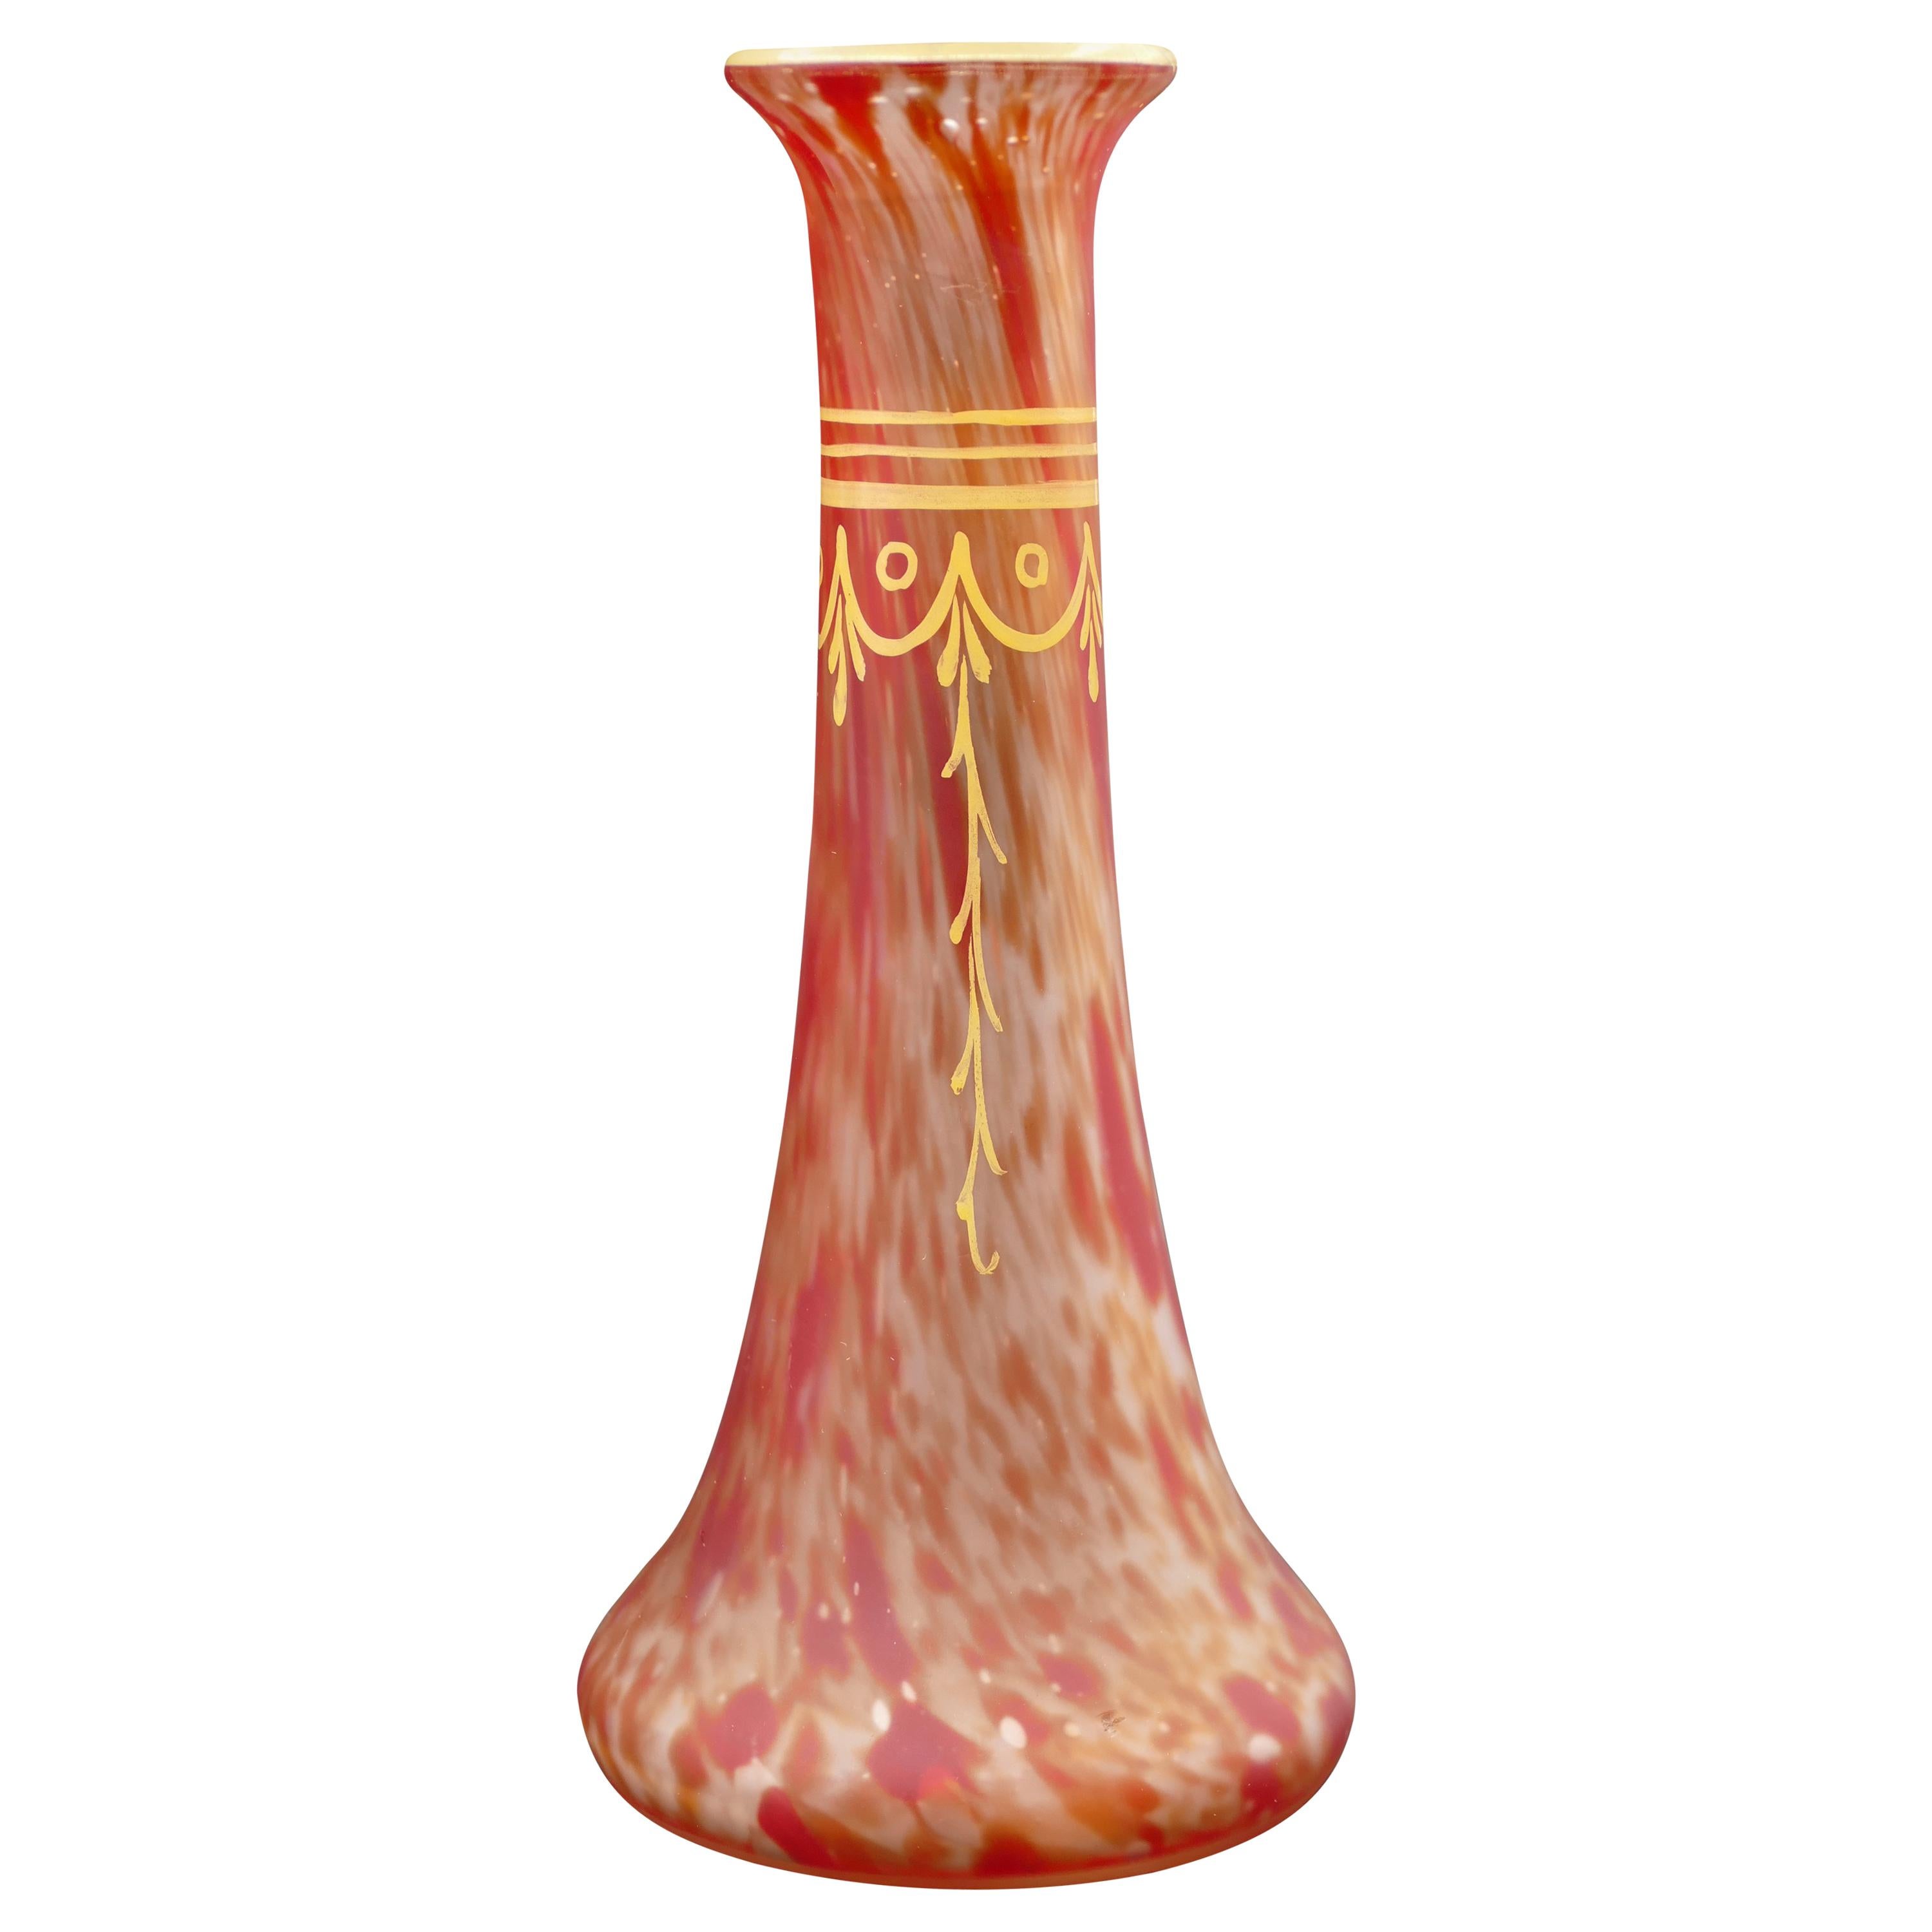 Art Nouveau Red Marbled Vase by Legras & Cie, France, Early 20th Century For Sale